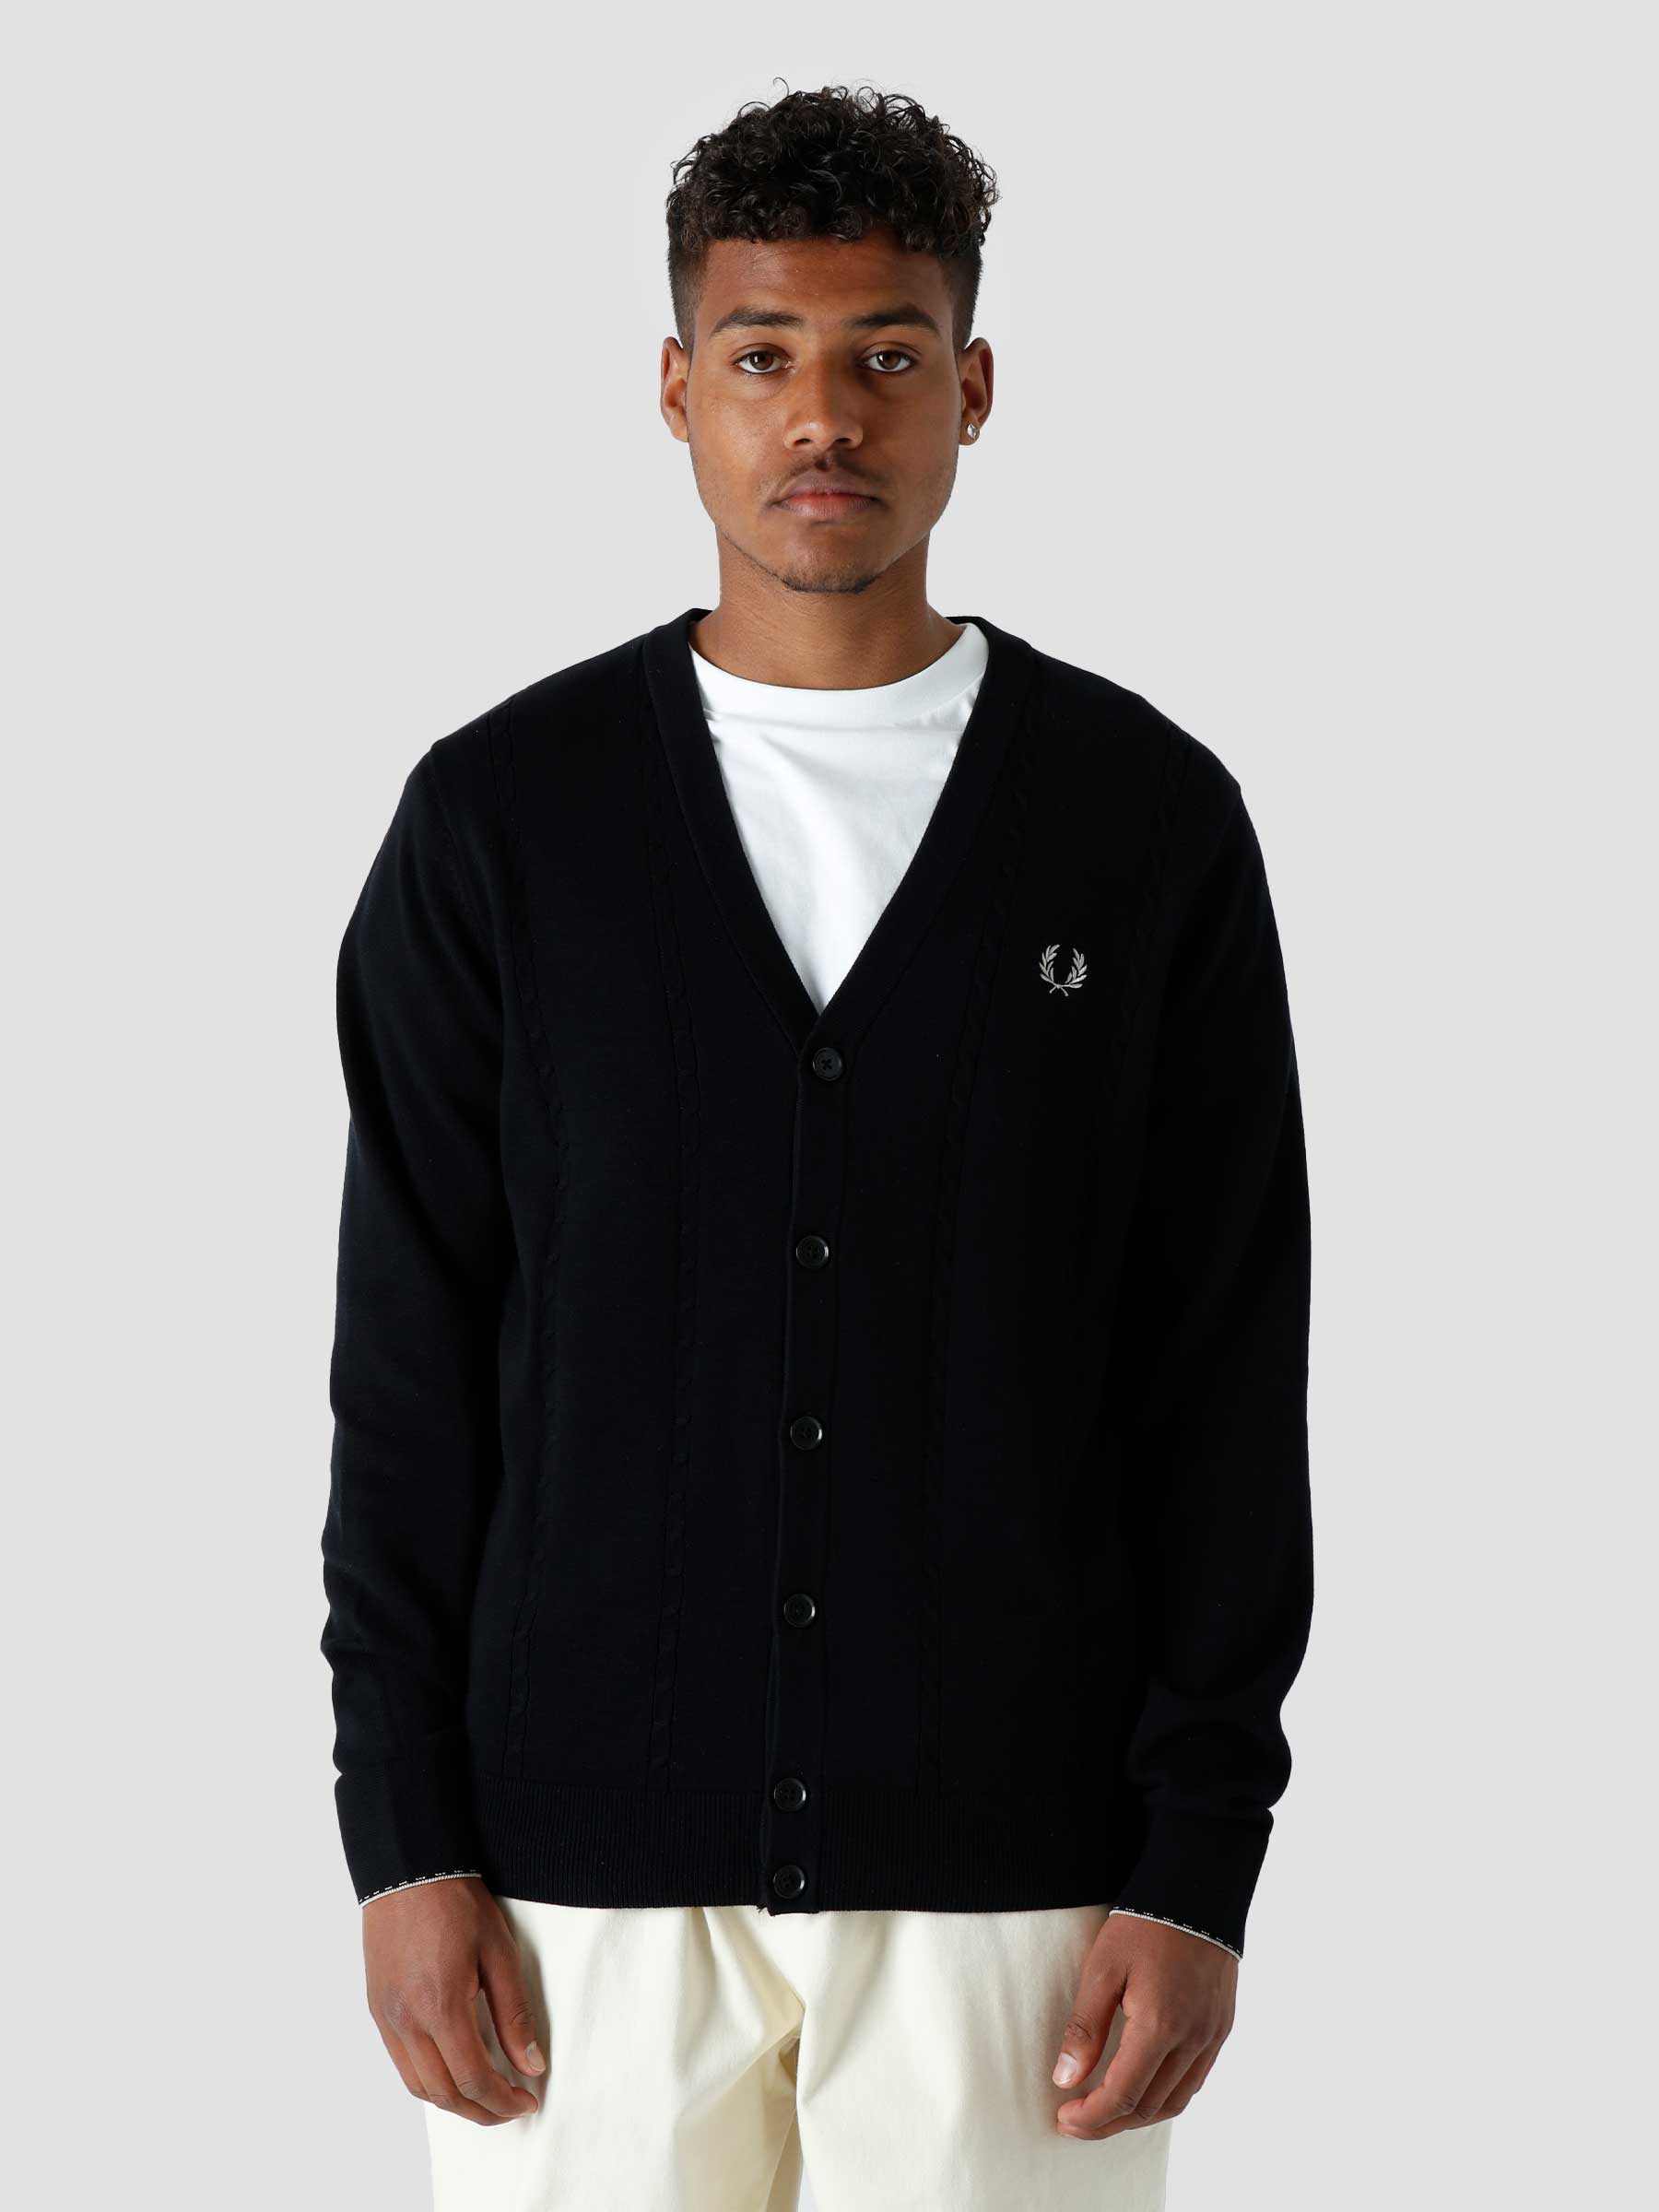 Fred Perry Cable Knit Cardigan Black K3553-102 | Freshcotton